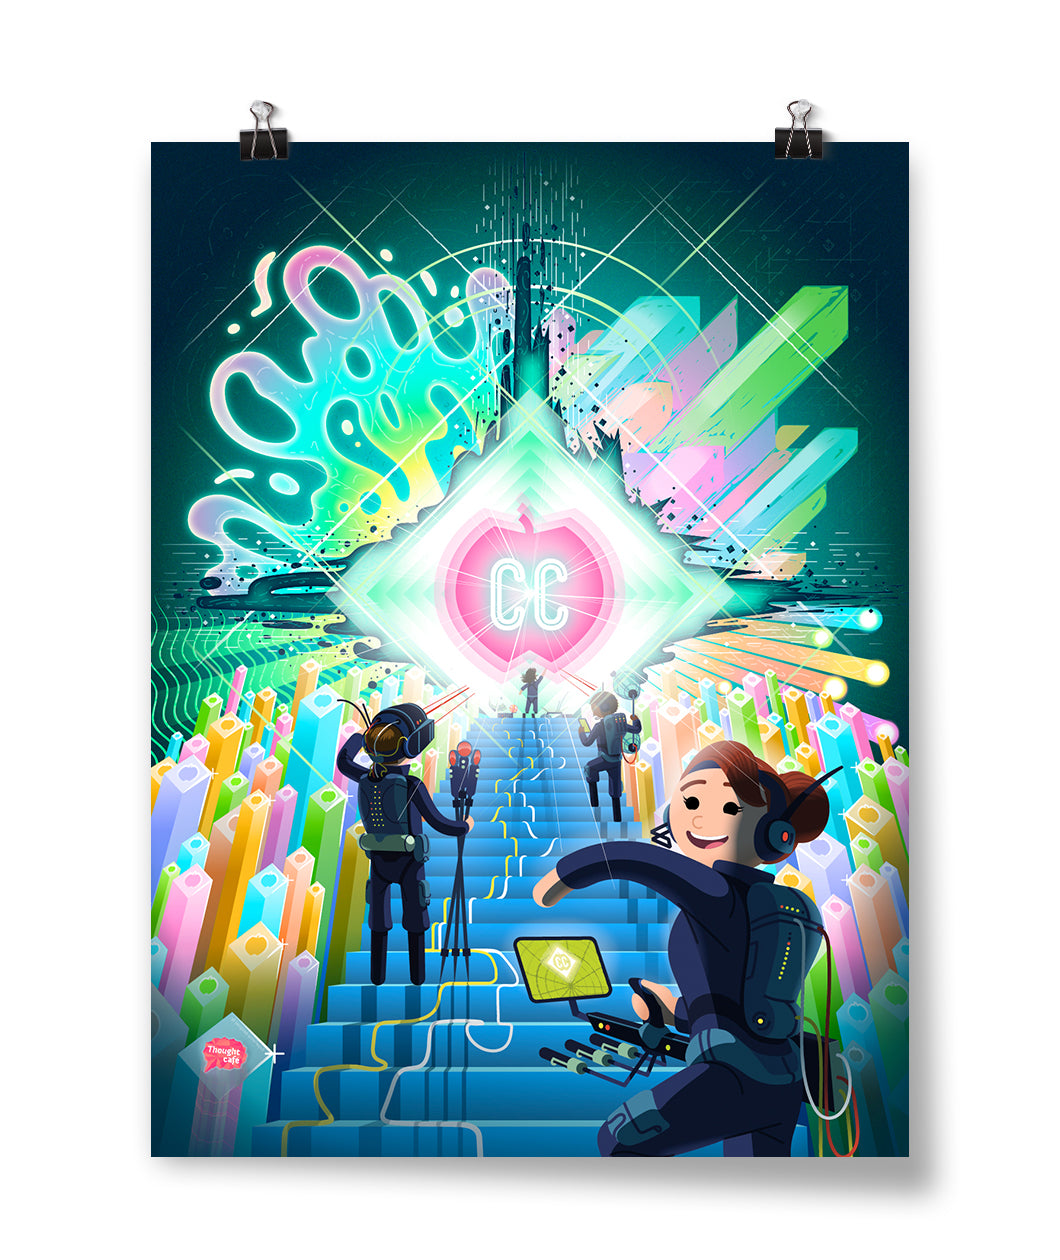 A drawing of figures in black VR suits on a stairway that leads to a an explosion of light and color with a 